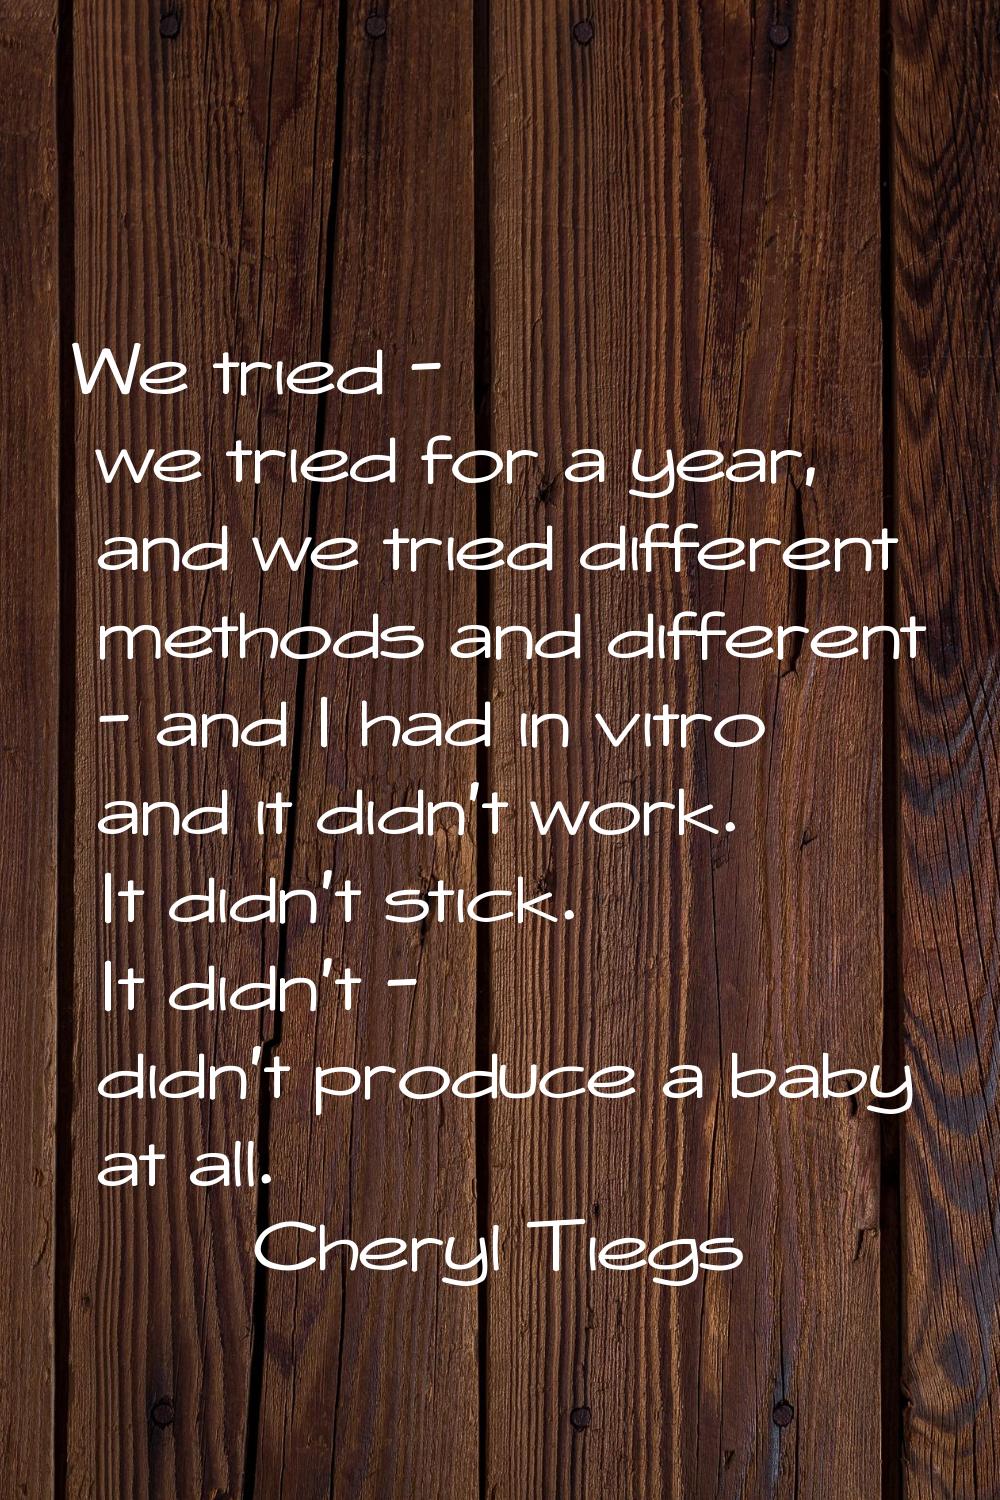 We tried - we tried for a year, and we tried different methods and different - and I had in vitro a